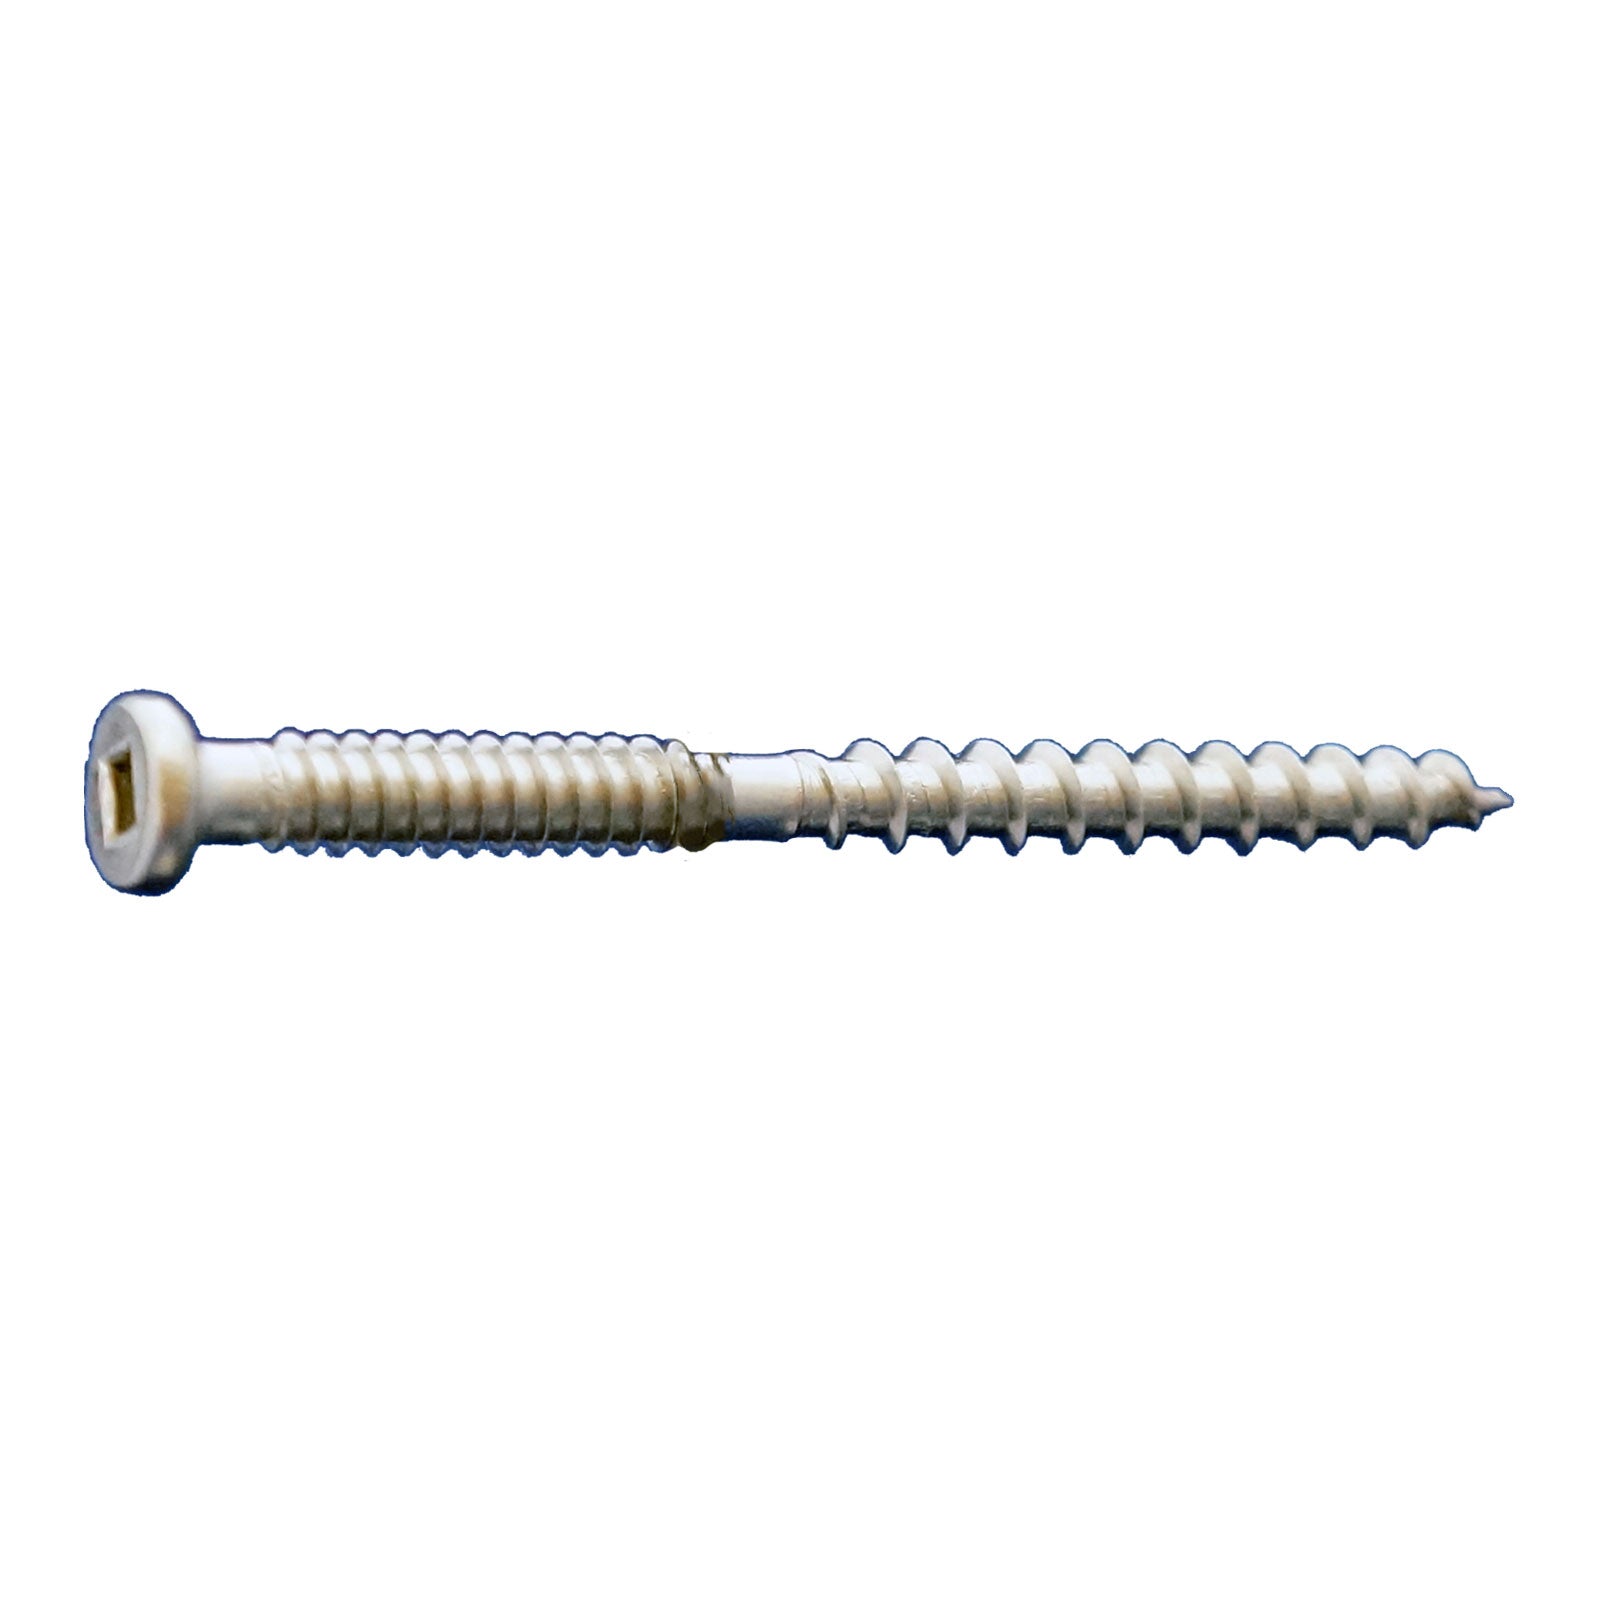 #10 x 3" #2 Square Button Head Deck Screw - 305 Stainless Steel, Pkg 1000